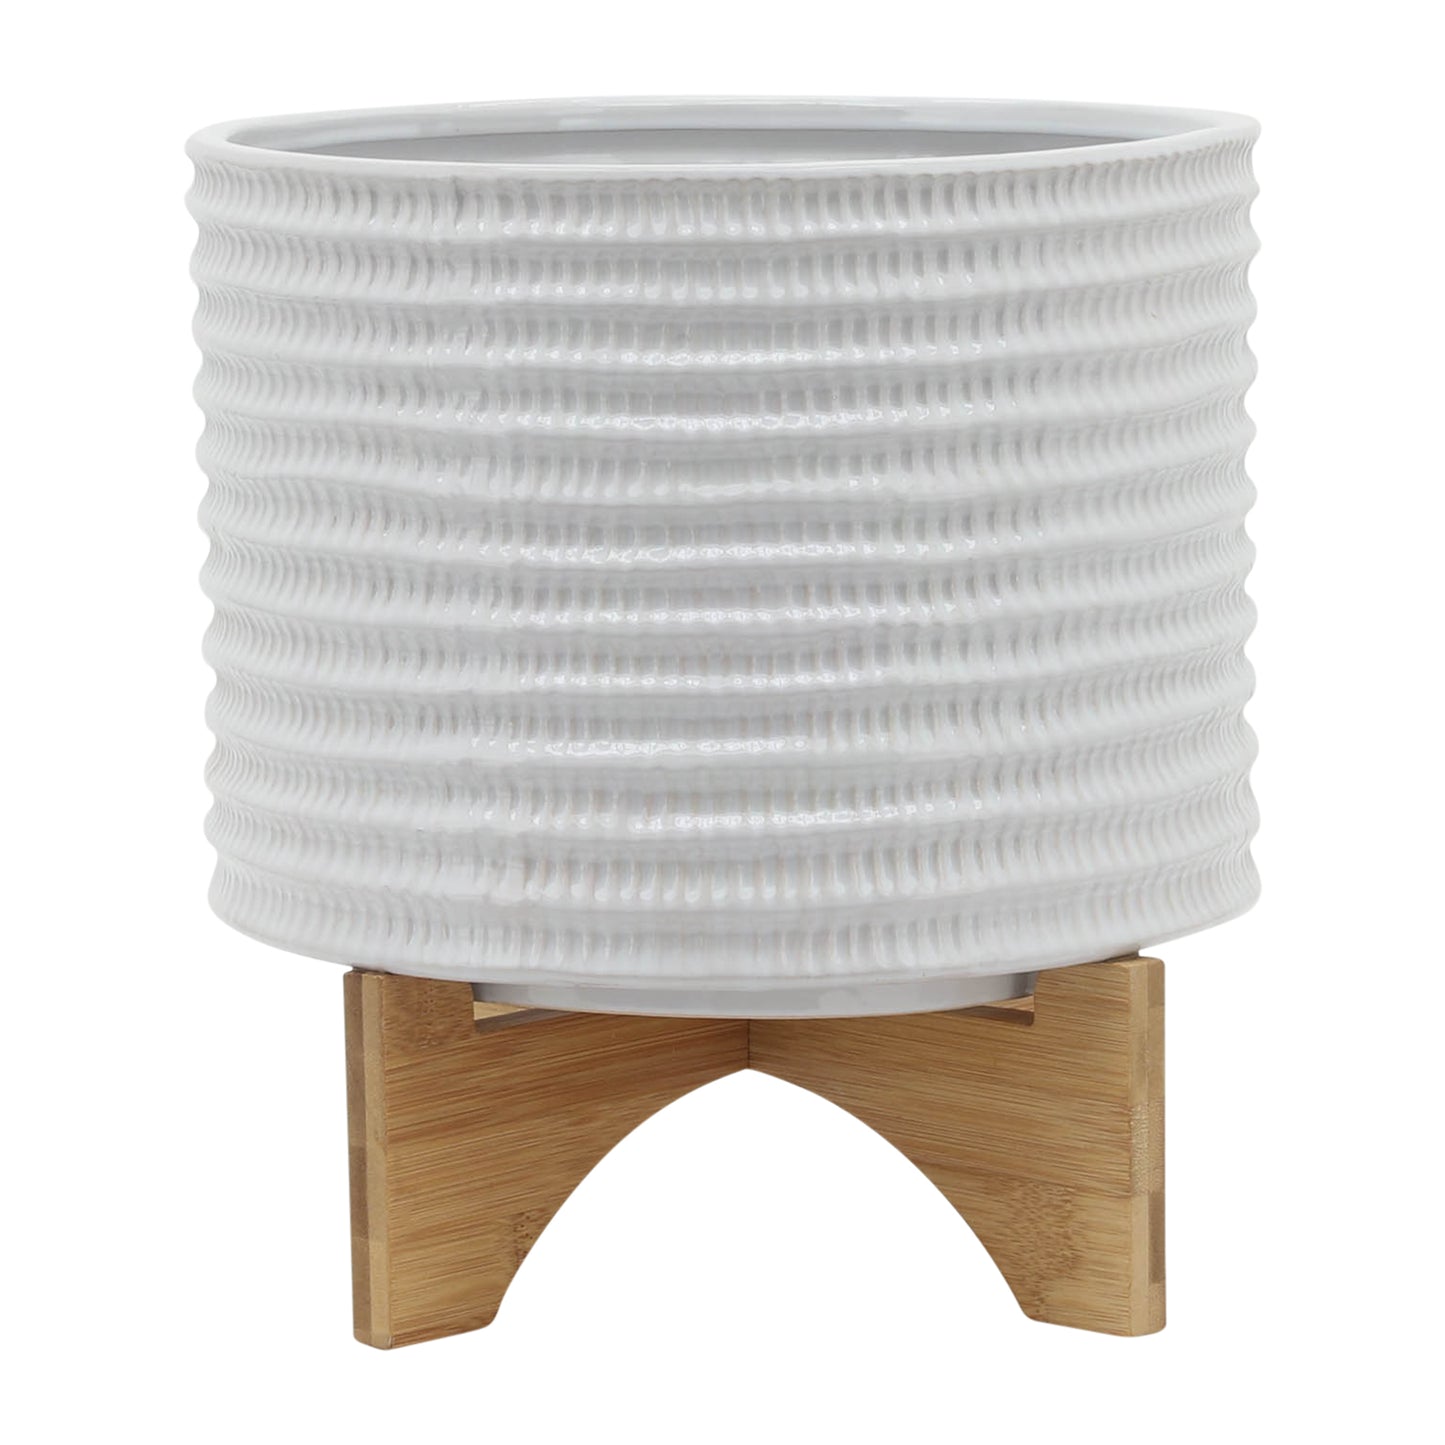 10" Textured Planter with Stand - White